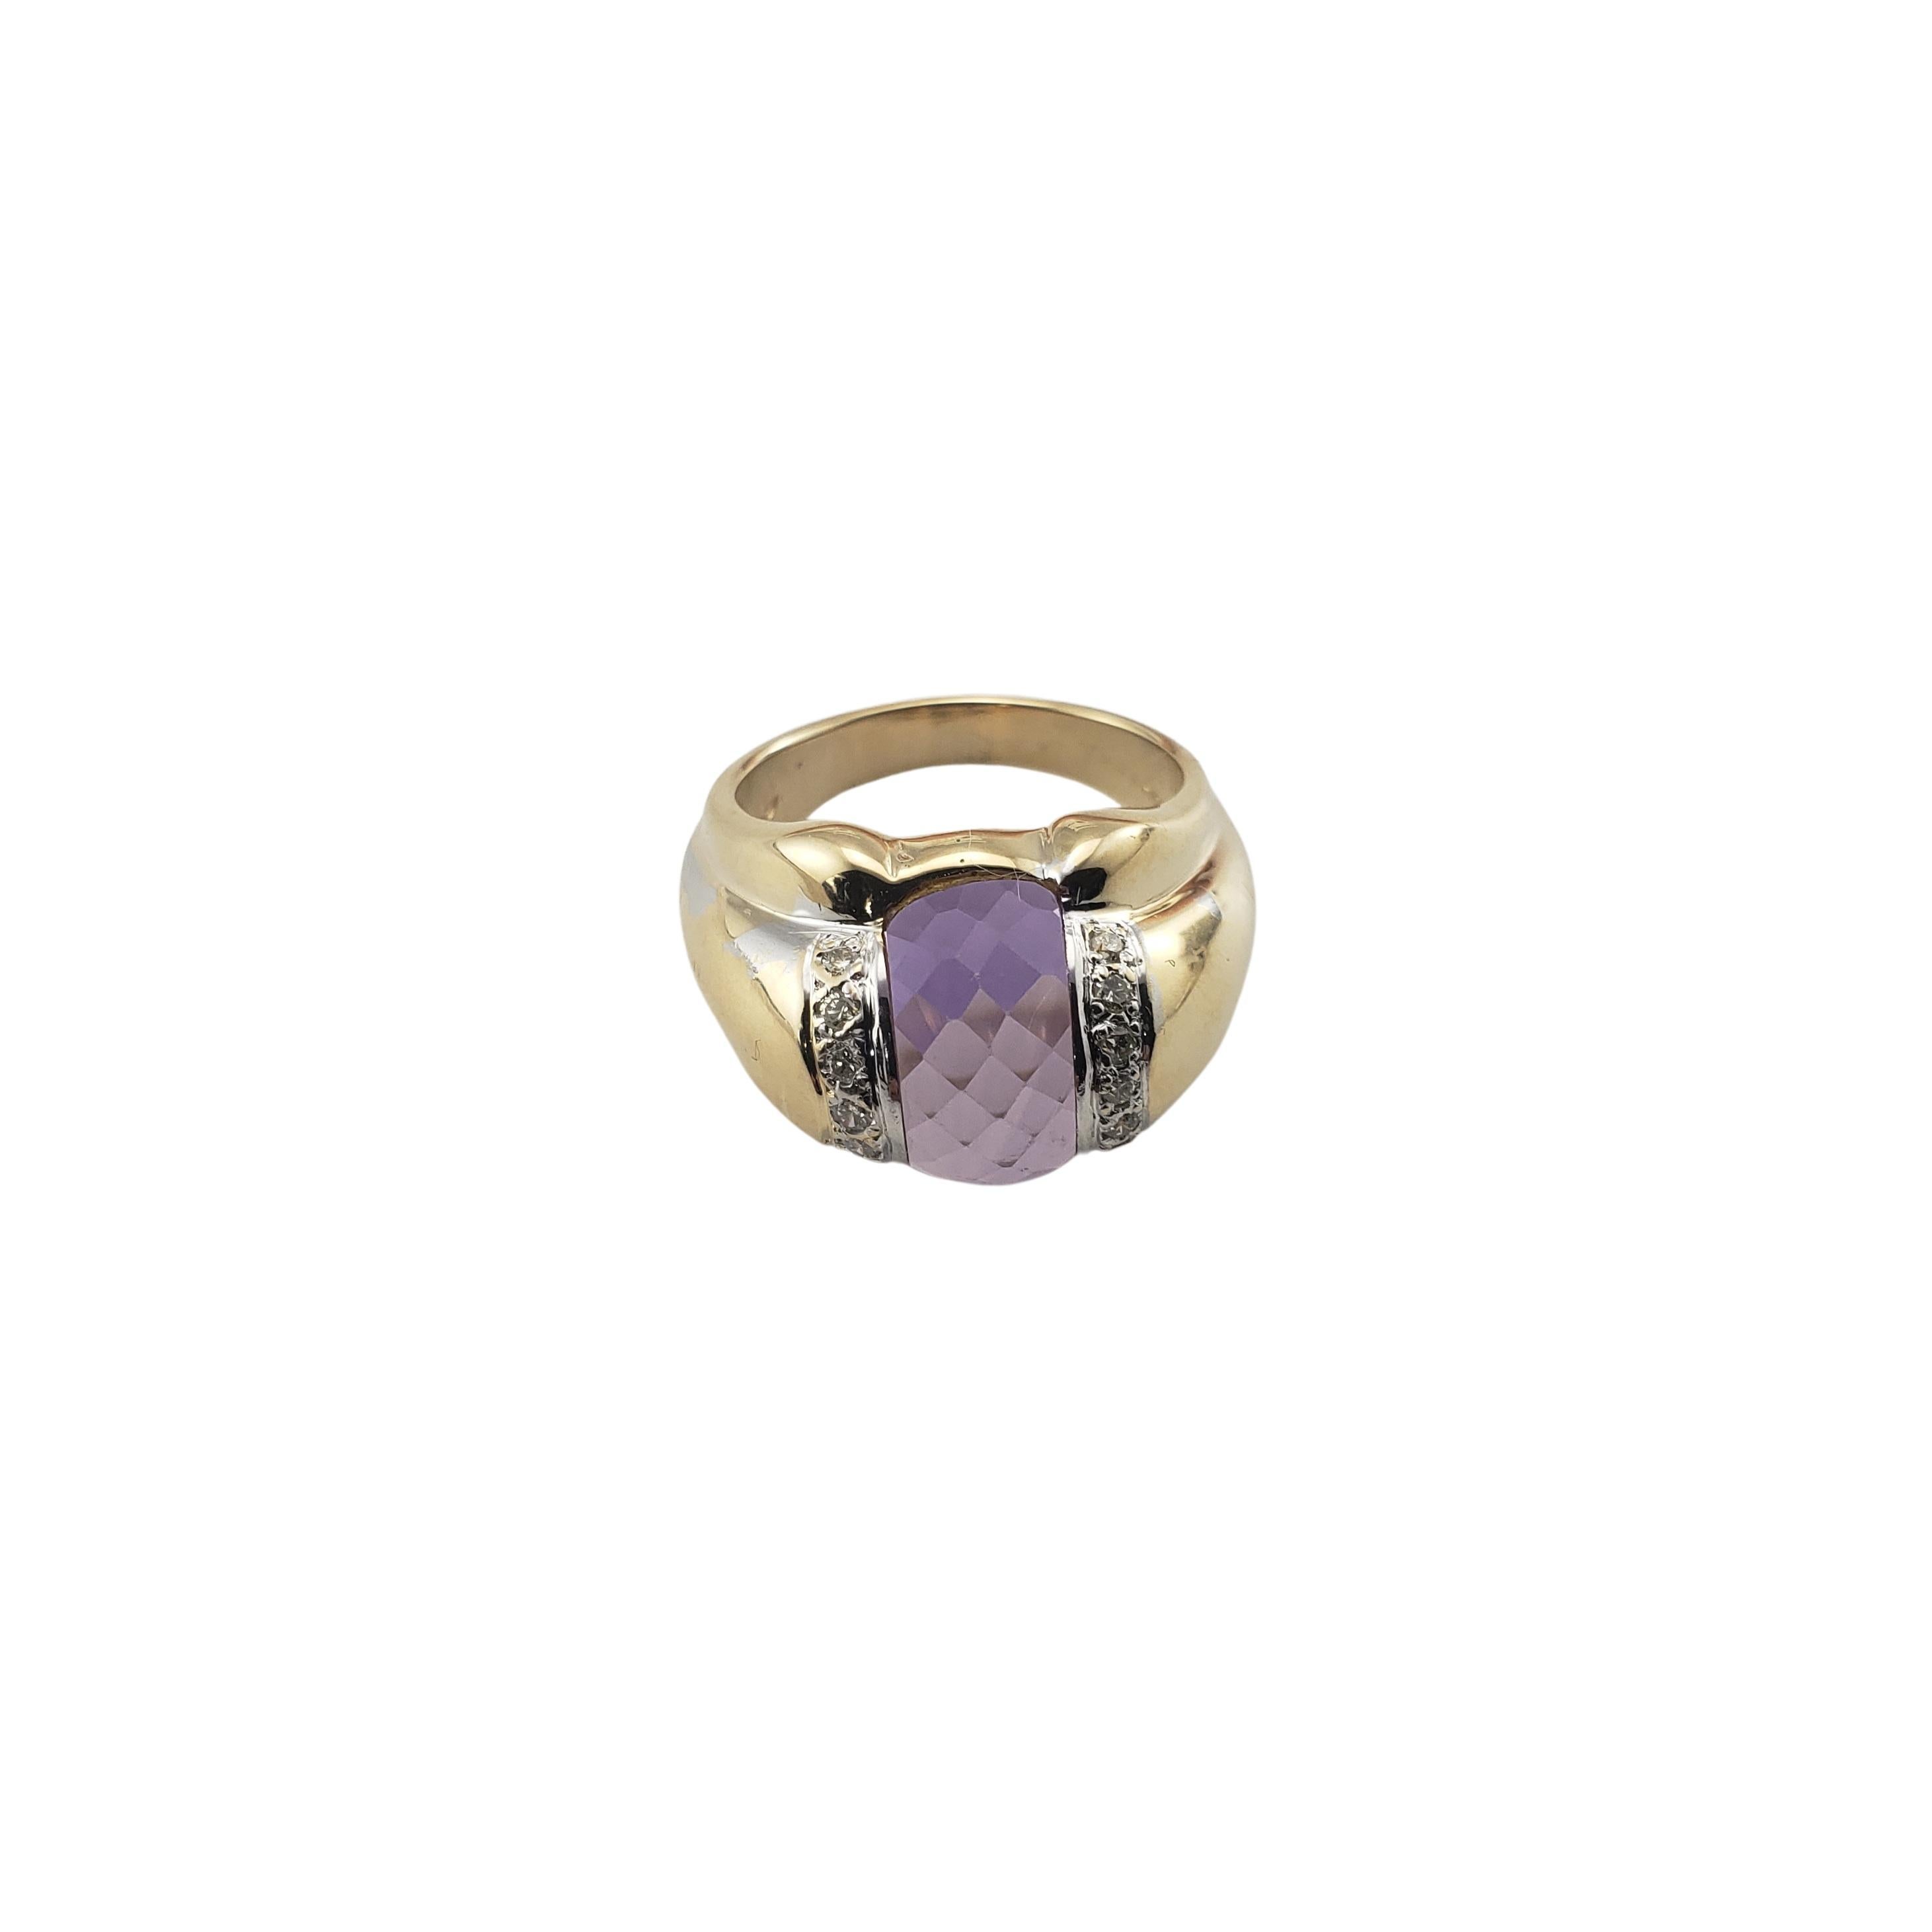 This stunning ring features one amethyst gemstone and 14 round brilliant cut diamonds set in classic 14K yellow gold.  

Width:  12 mm.  Shank:  3 mm.

Amethyst weight:  5.75

 Total diamond weight:  .14 ct.

Diamond color: K-L

Diamond clarity: